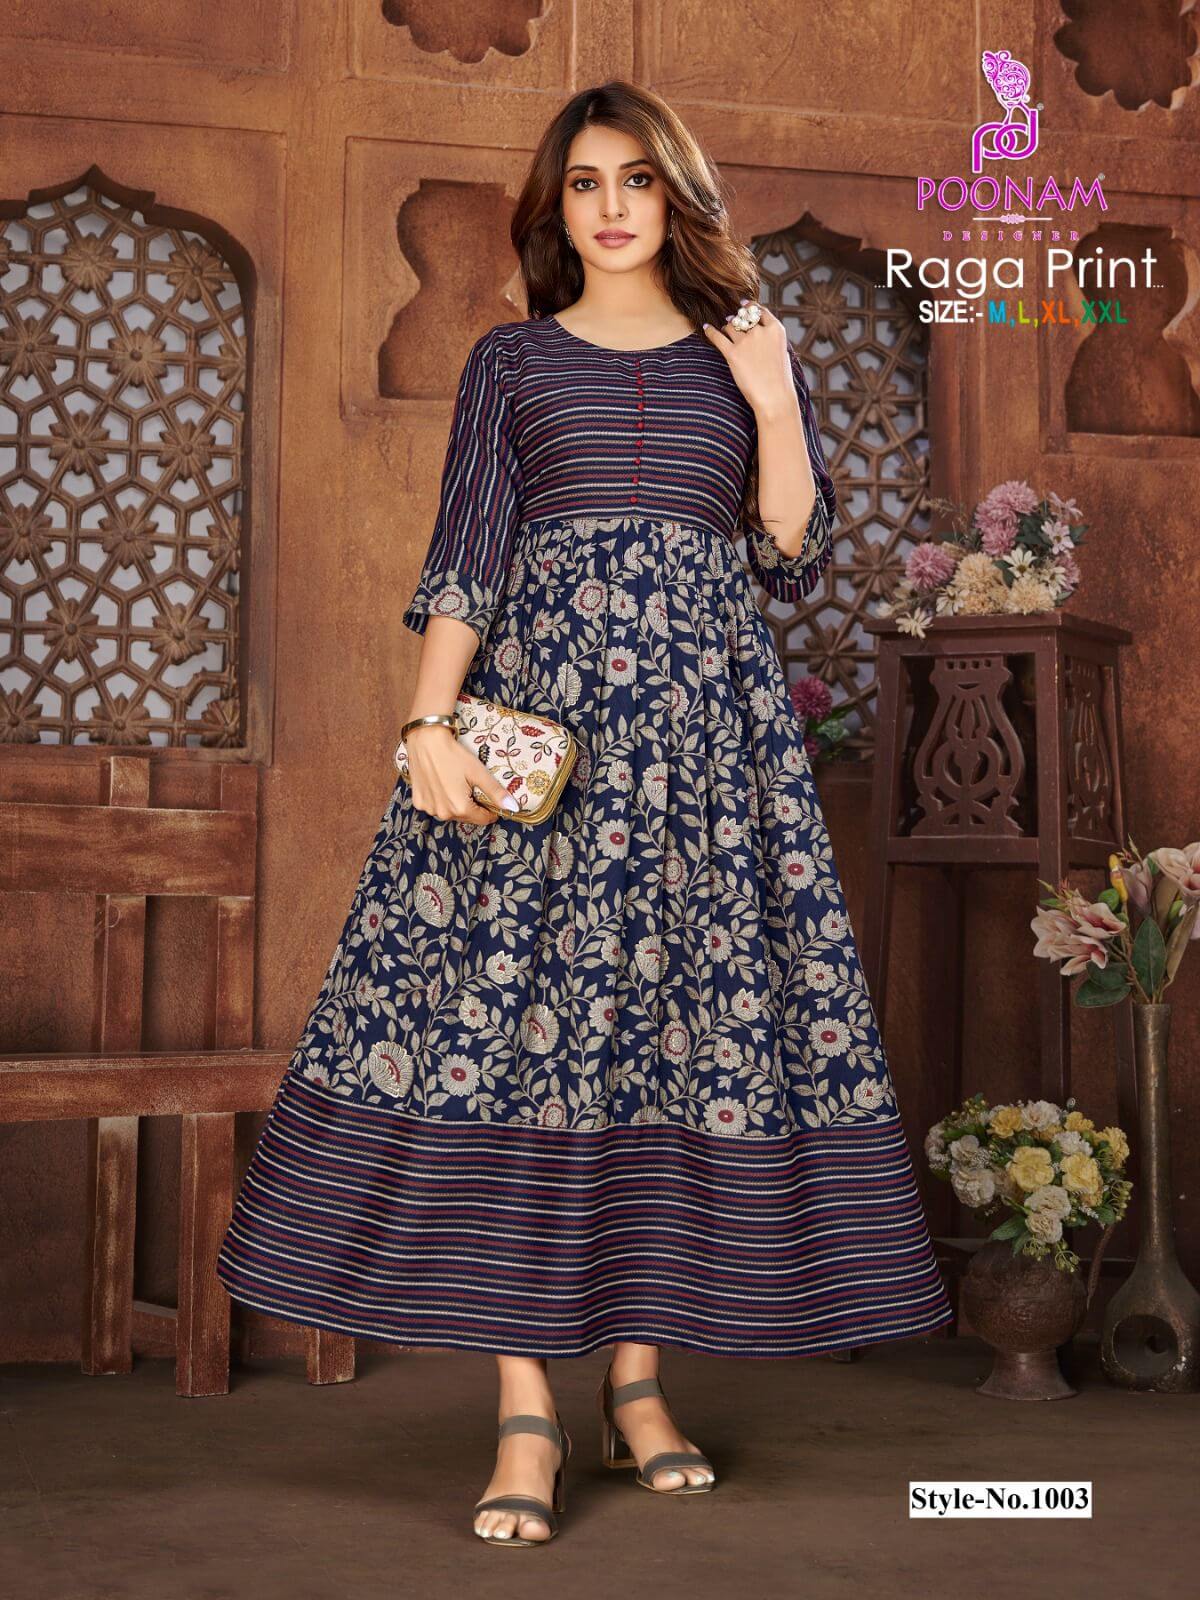 Poonam Raga Print Gowns Catalog collection 11